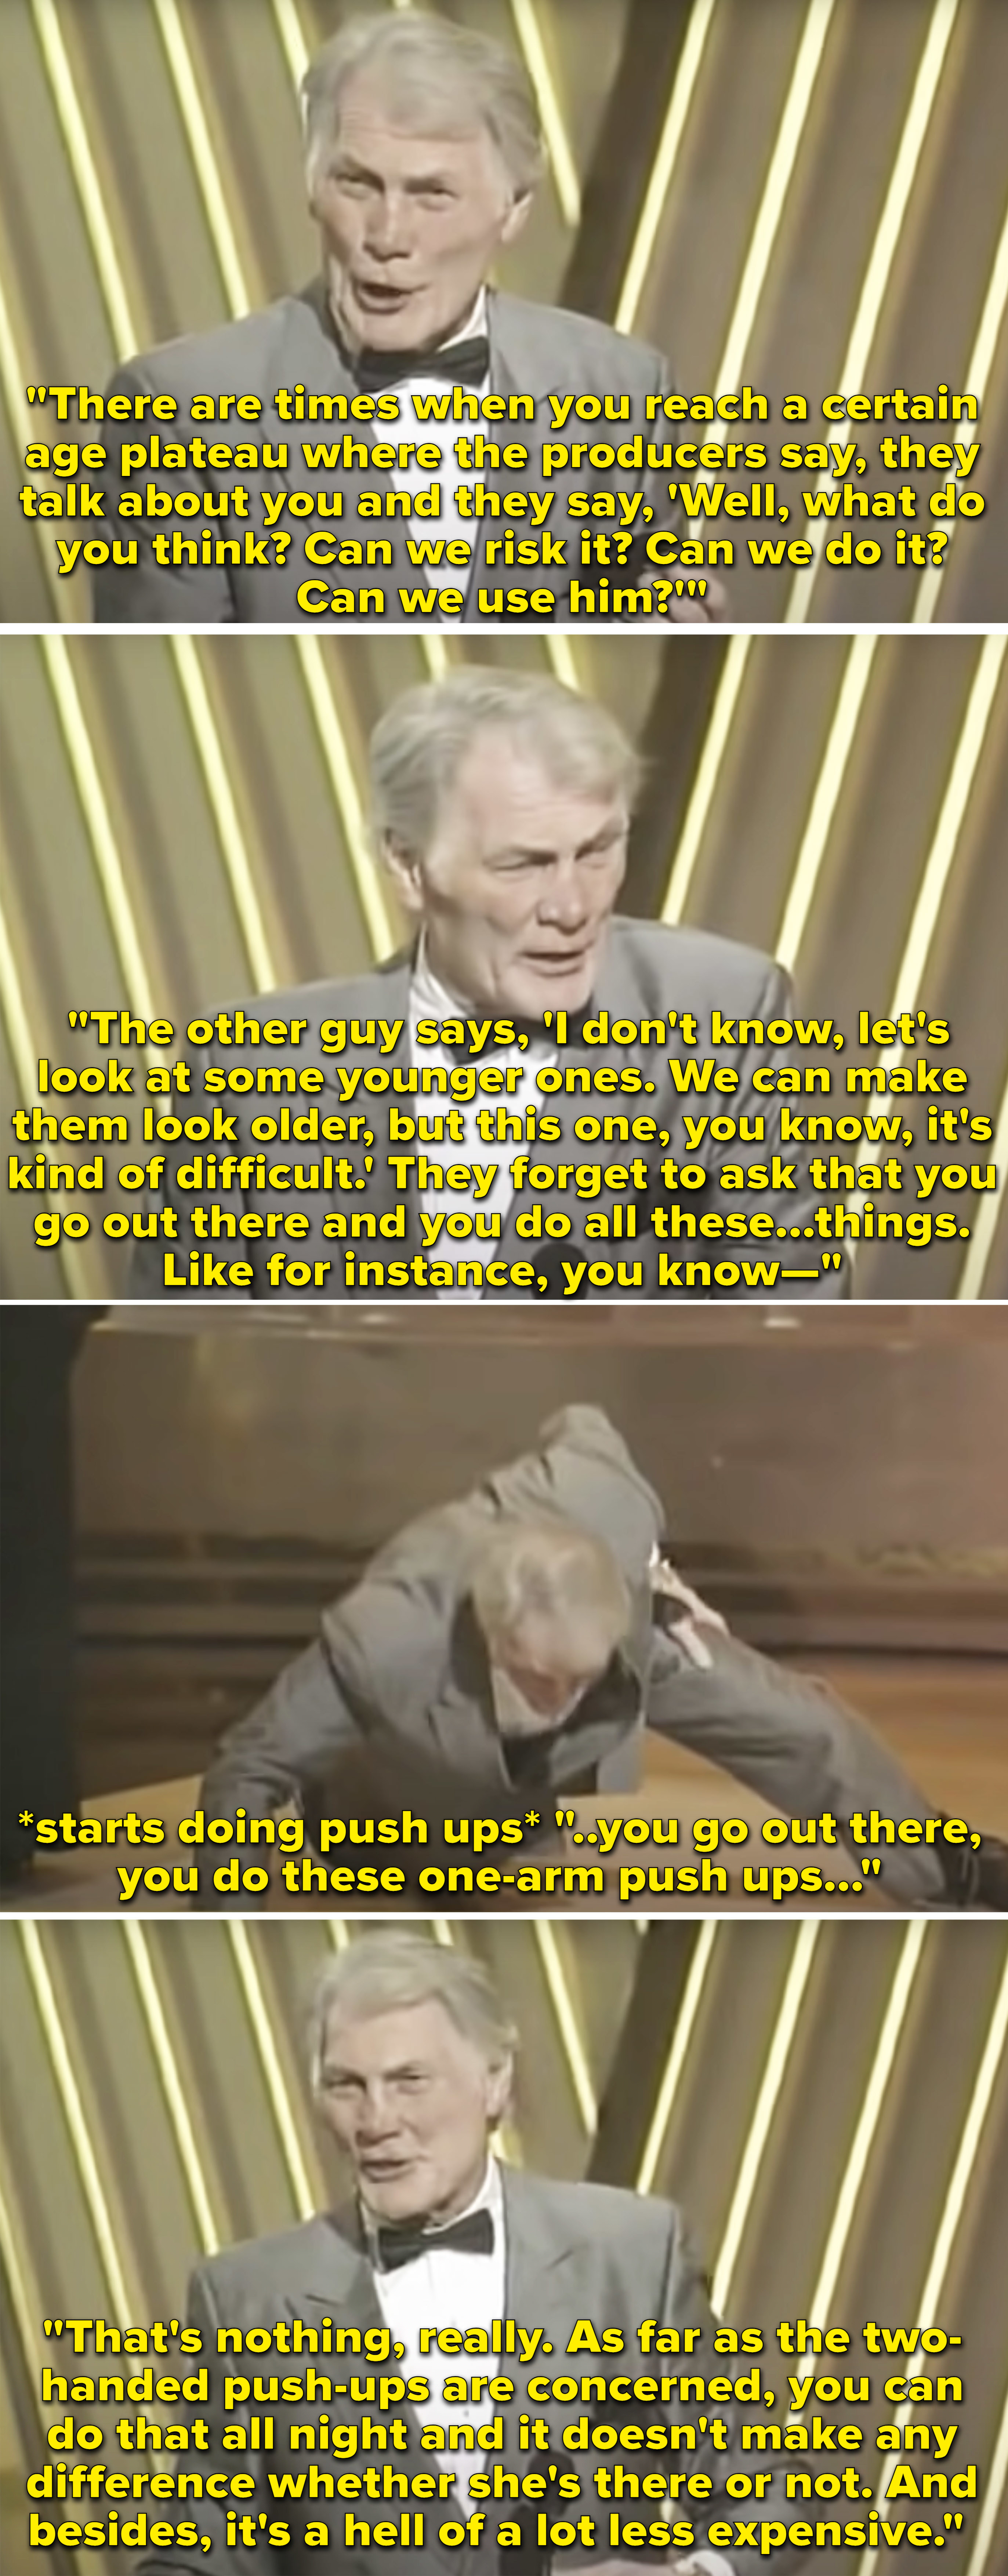 Jack talking about the ageism that occurs in Hollywood casting and then getting down to do one-armed push-ups